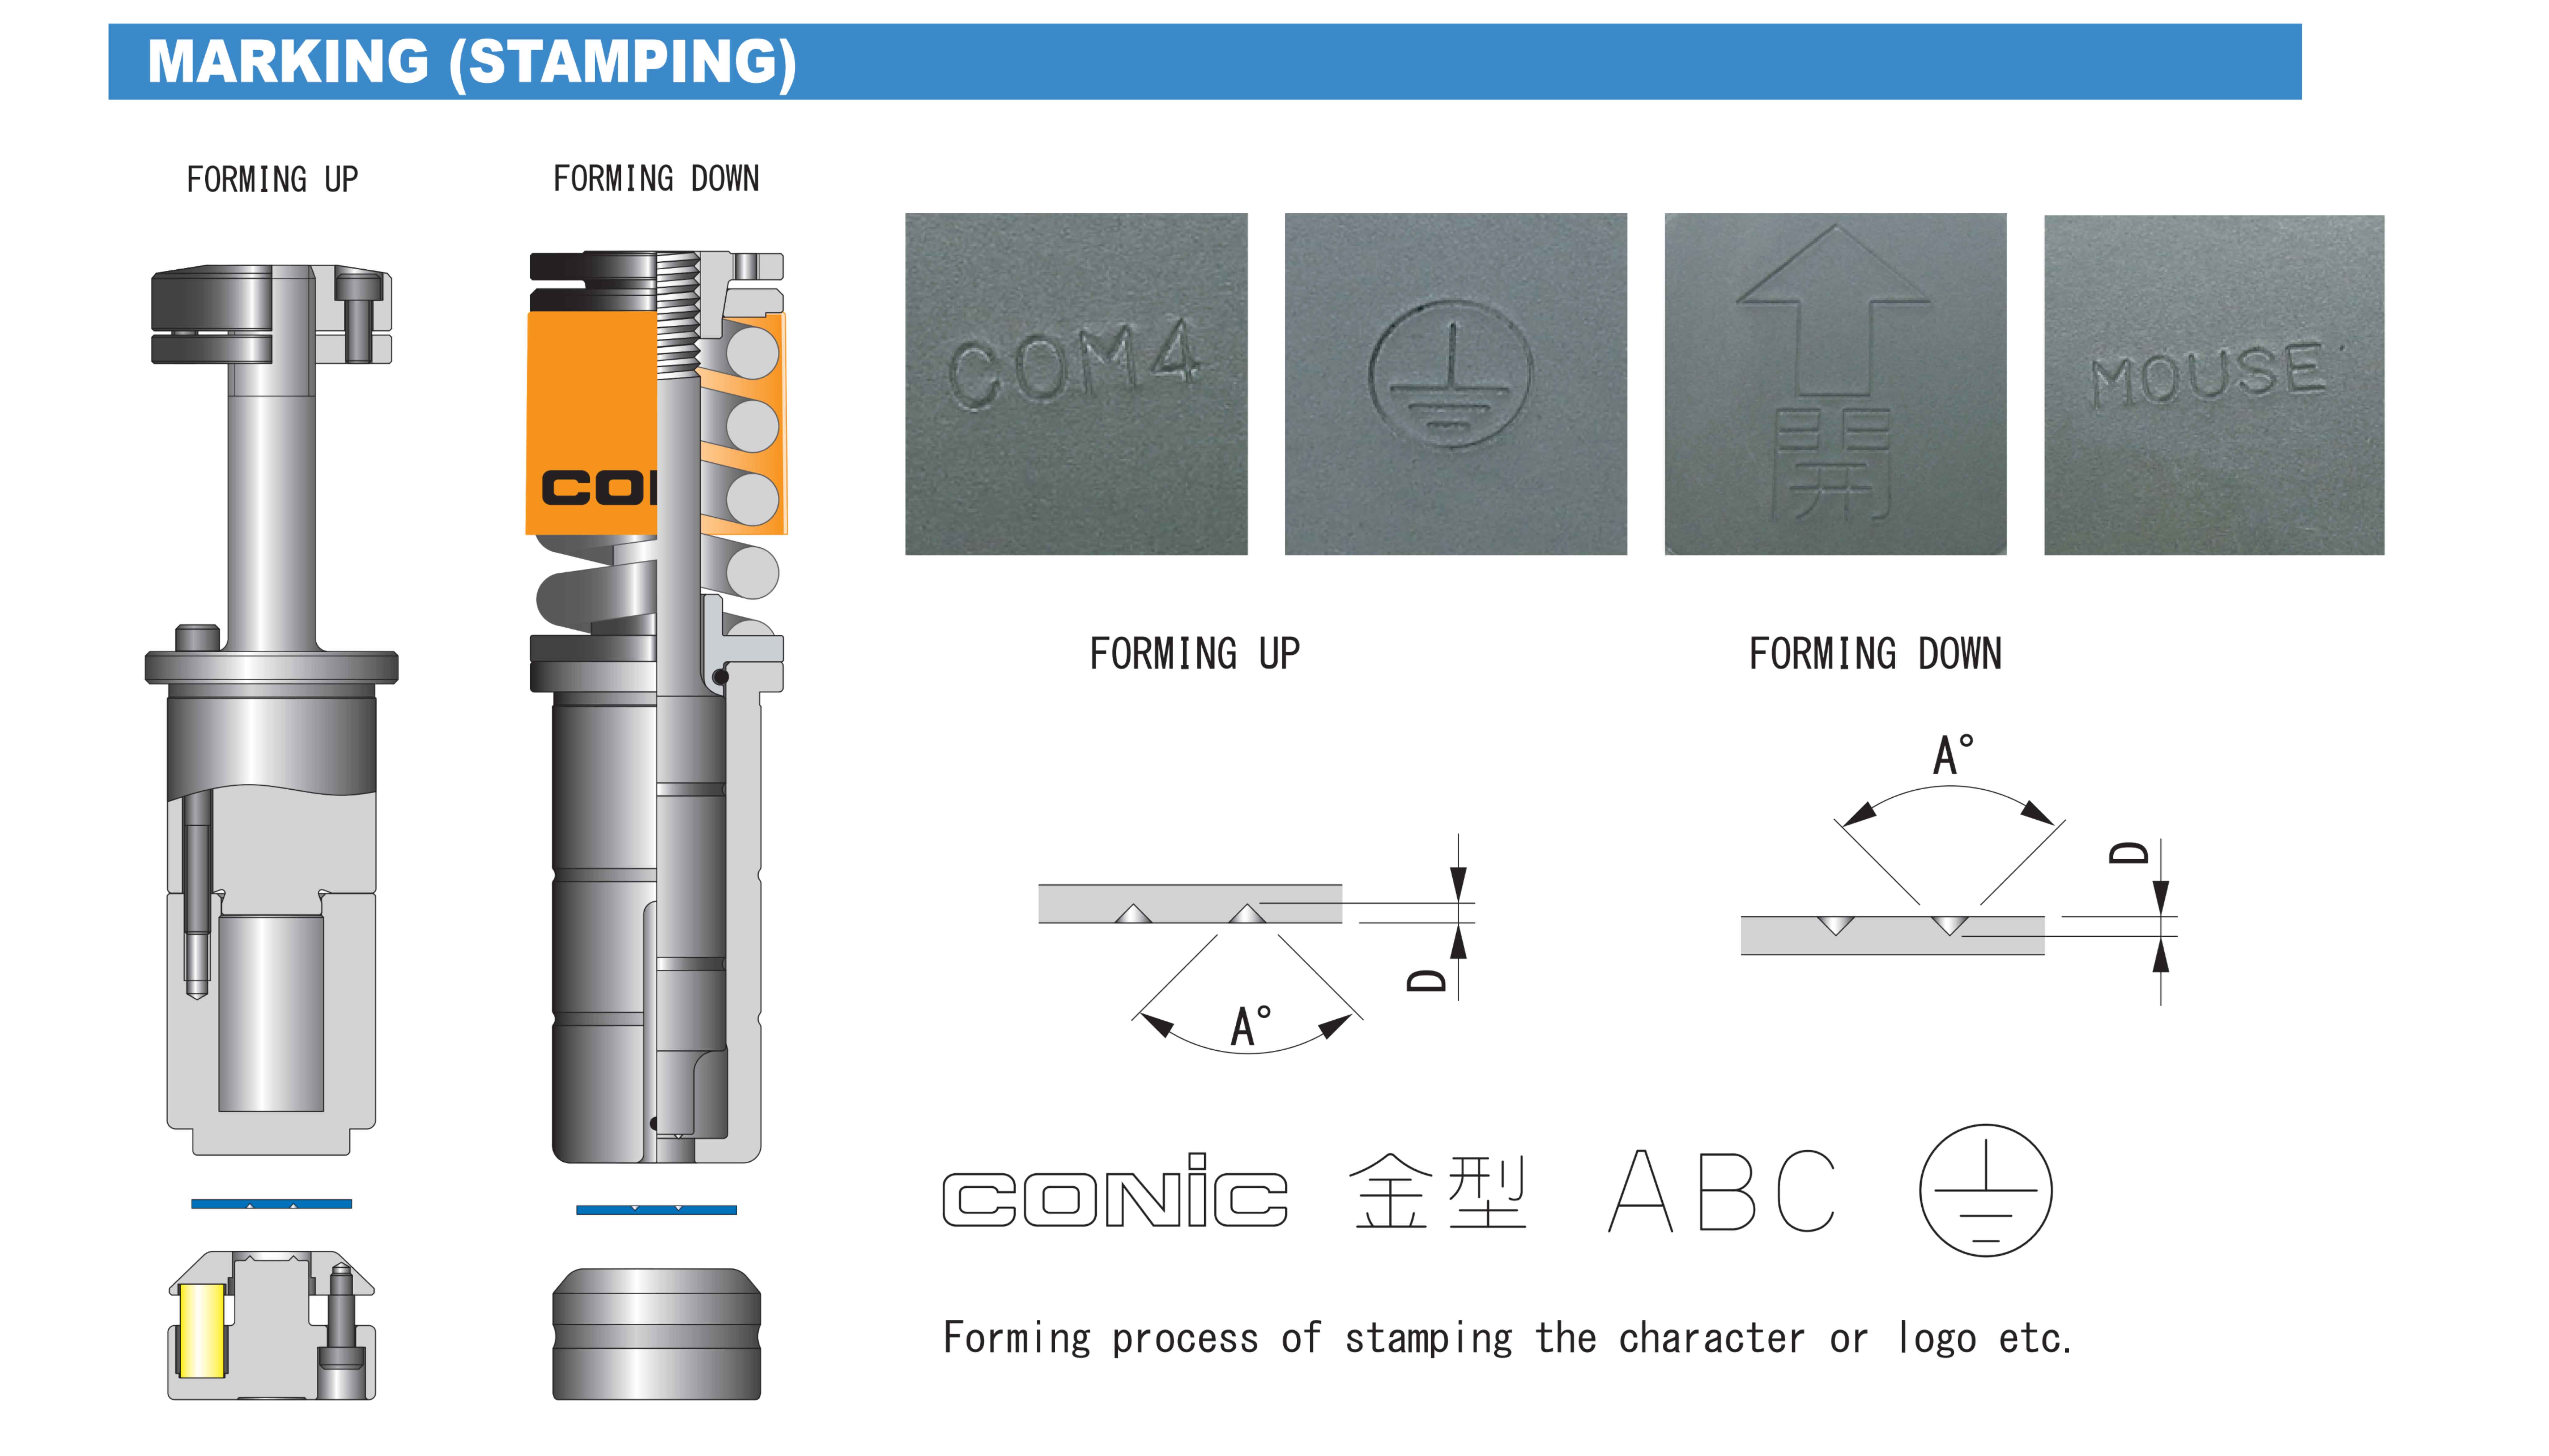 CONIC-FORMING-MARKING-STAMPING-AMADA